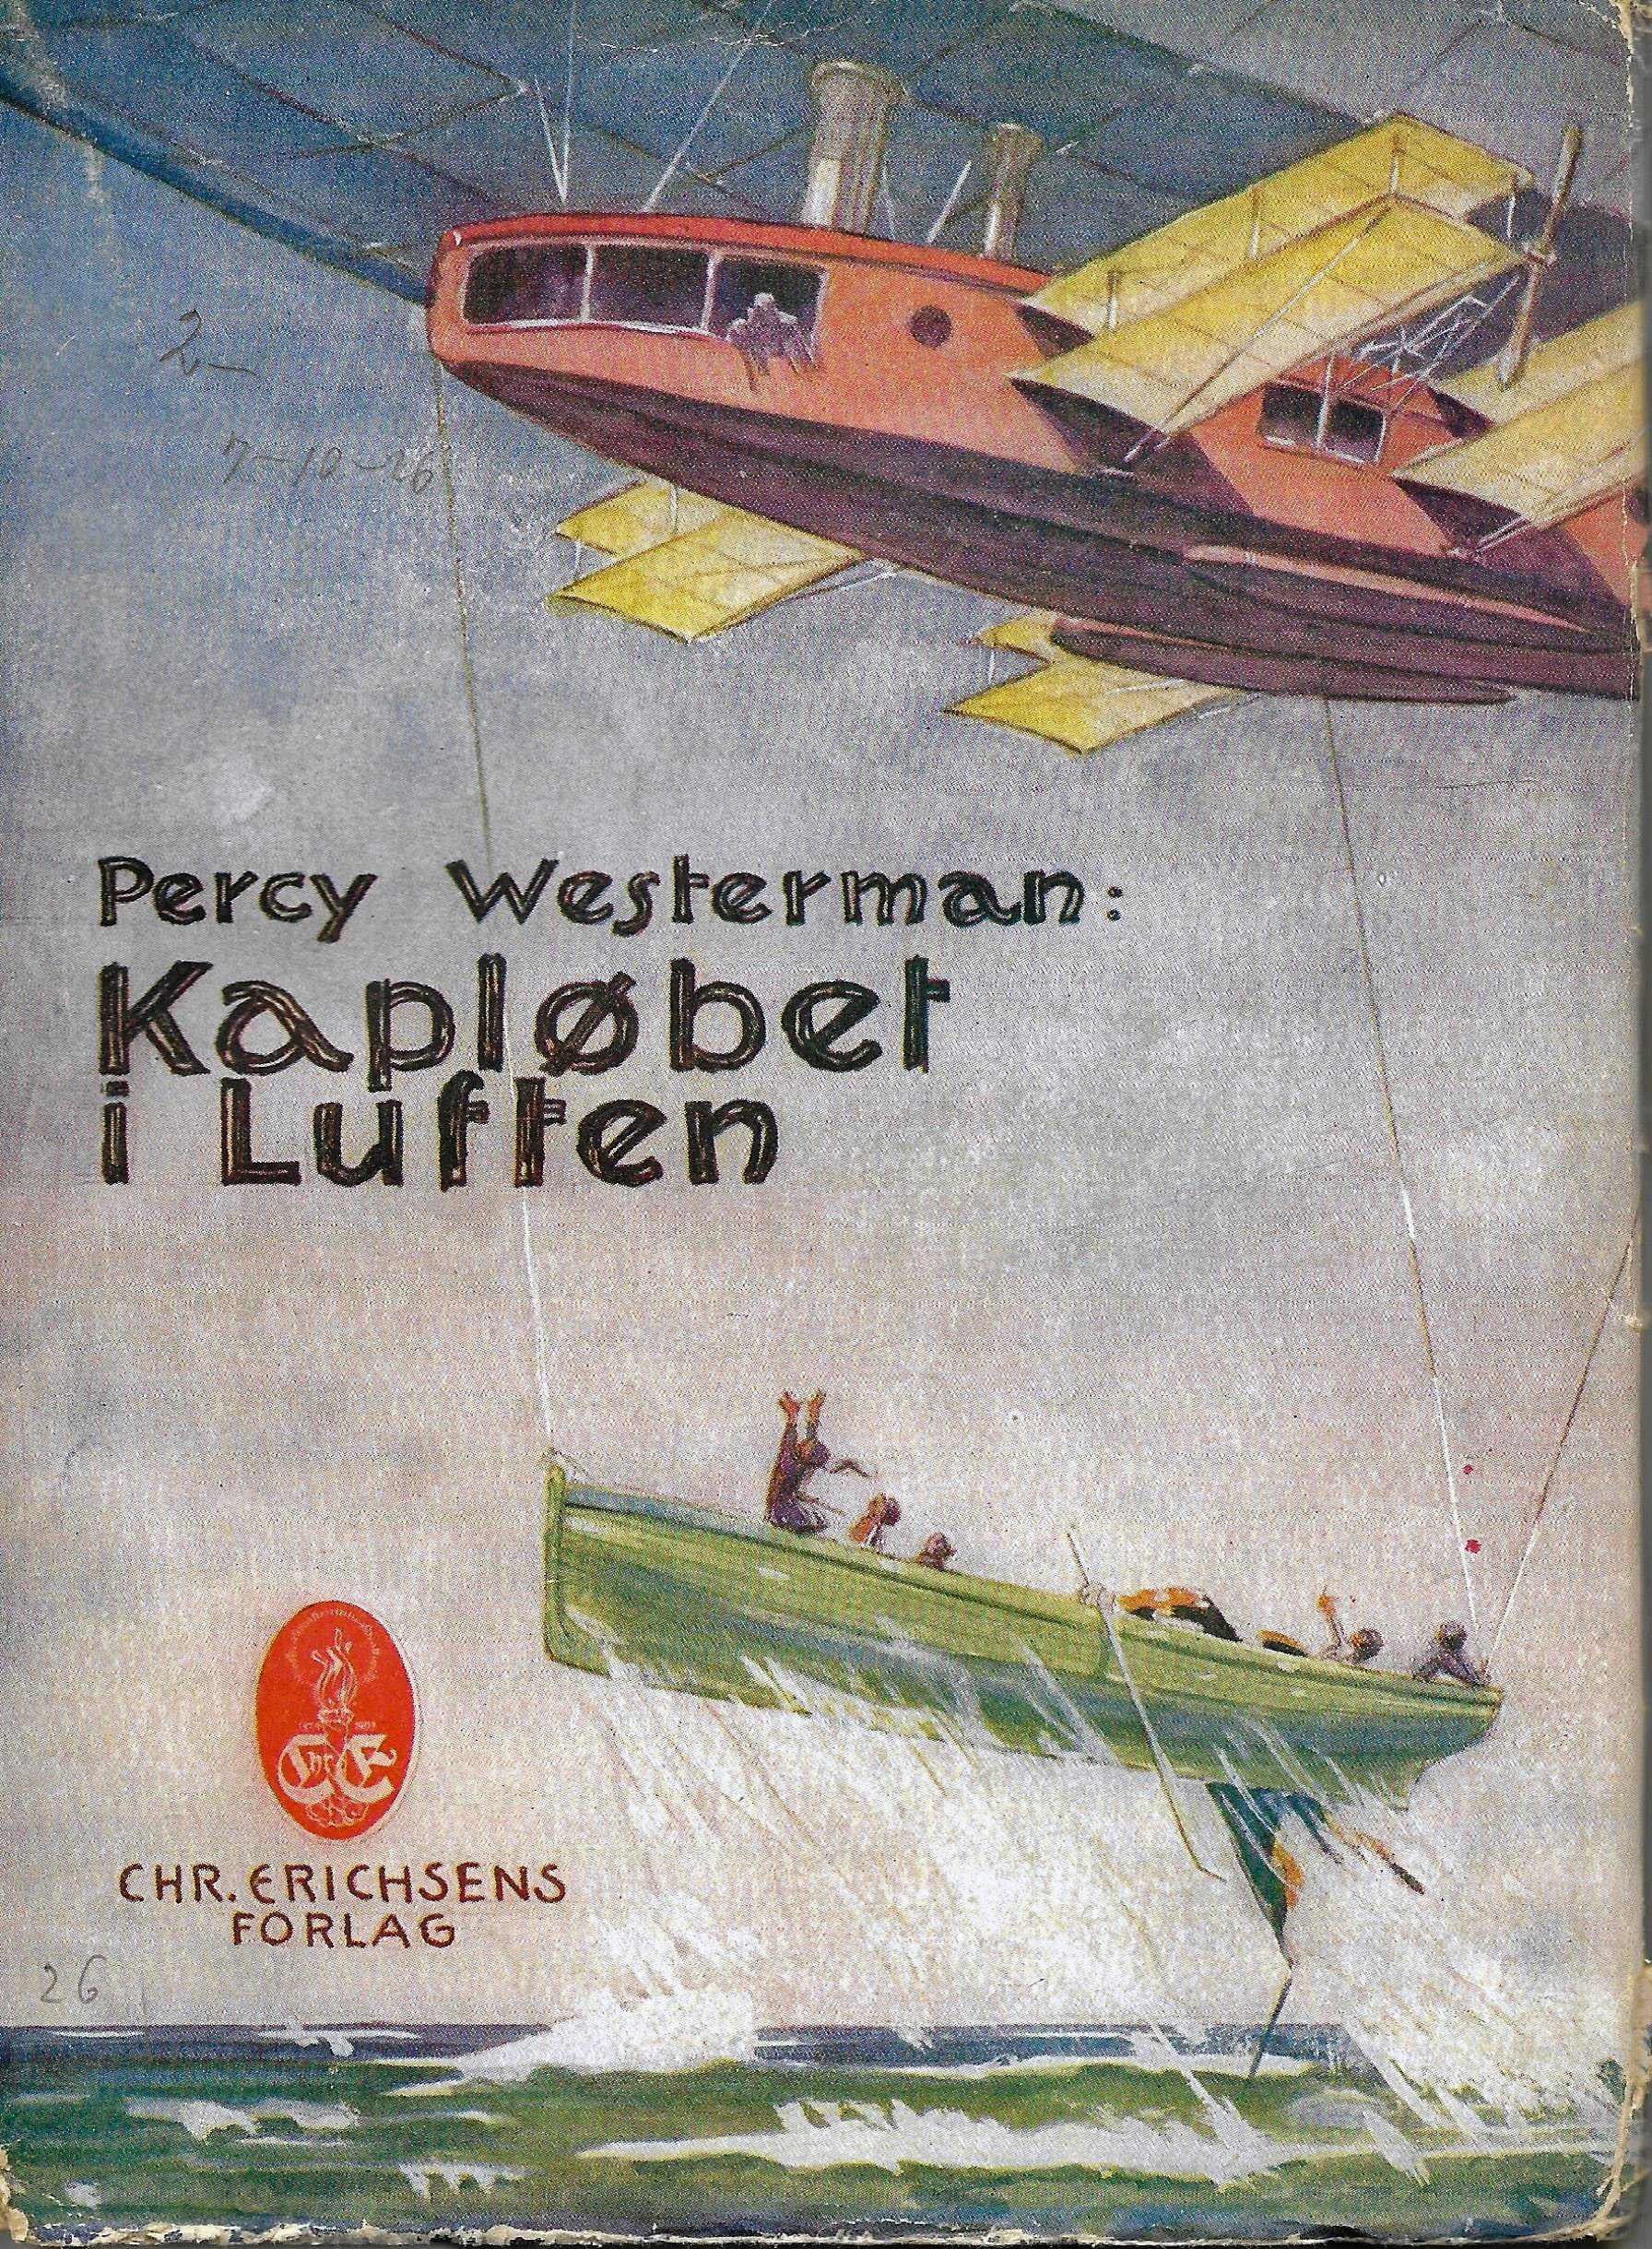 Kapløbet i luften (The Airship The Golden Hind) Percy Westerman 1926